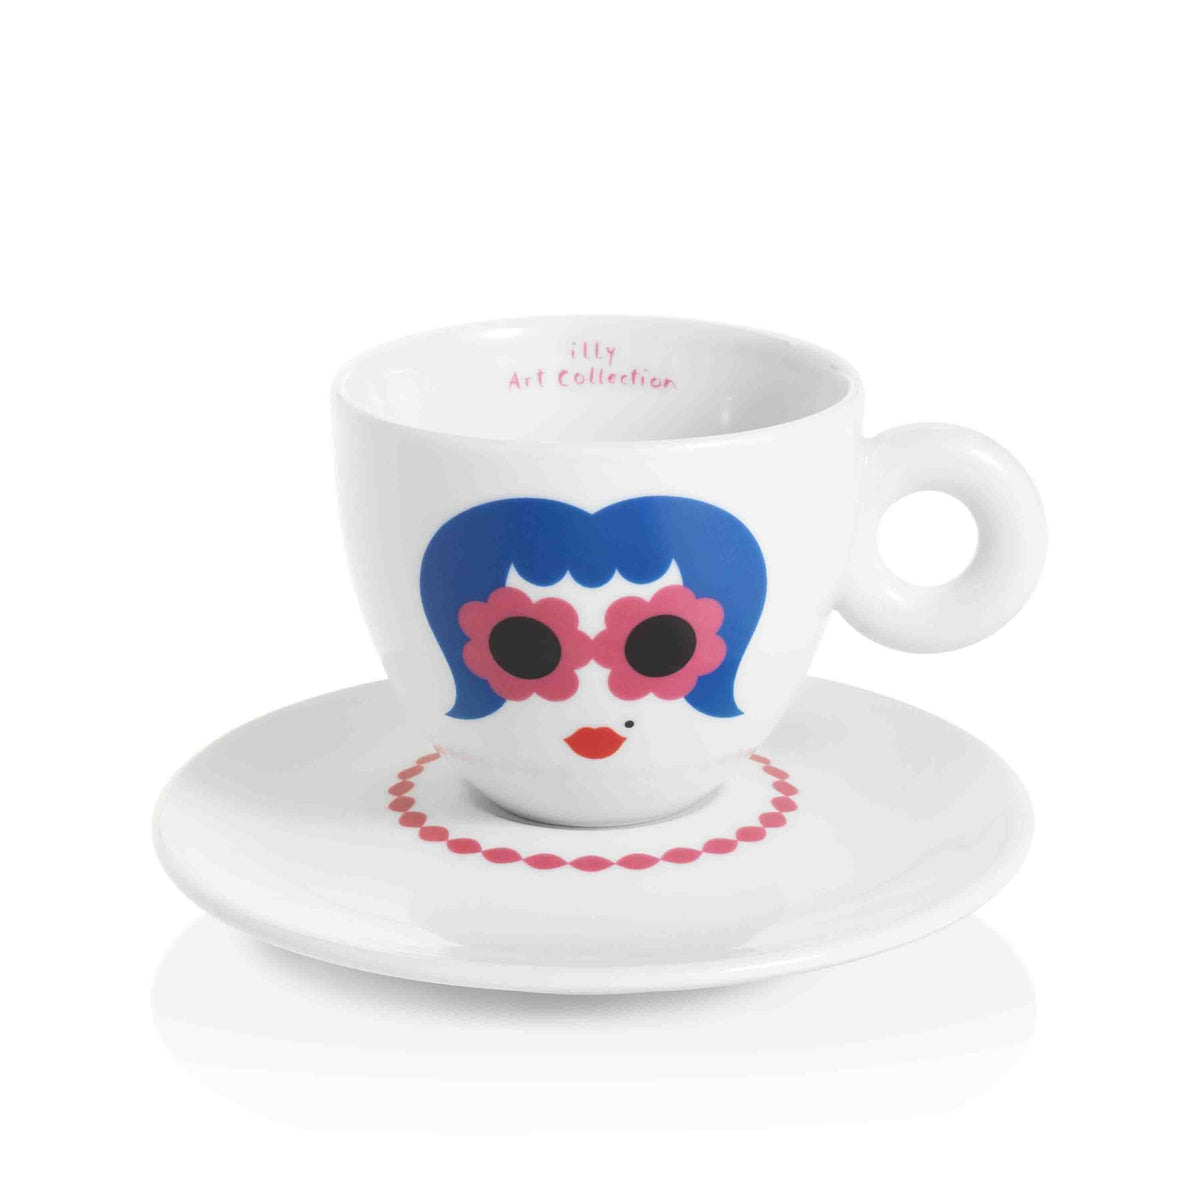 illy Art Collection Olimpia Zagnoli Cappuccino Cups - Set of 2 - Whole Love